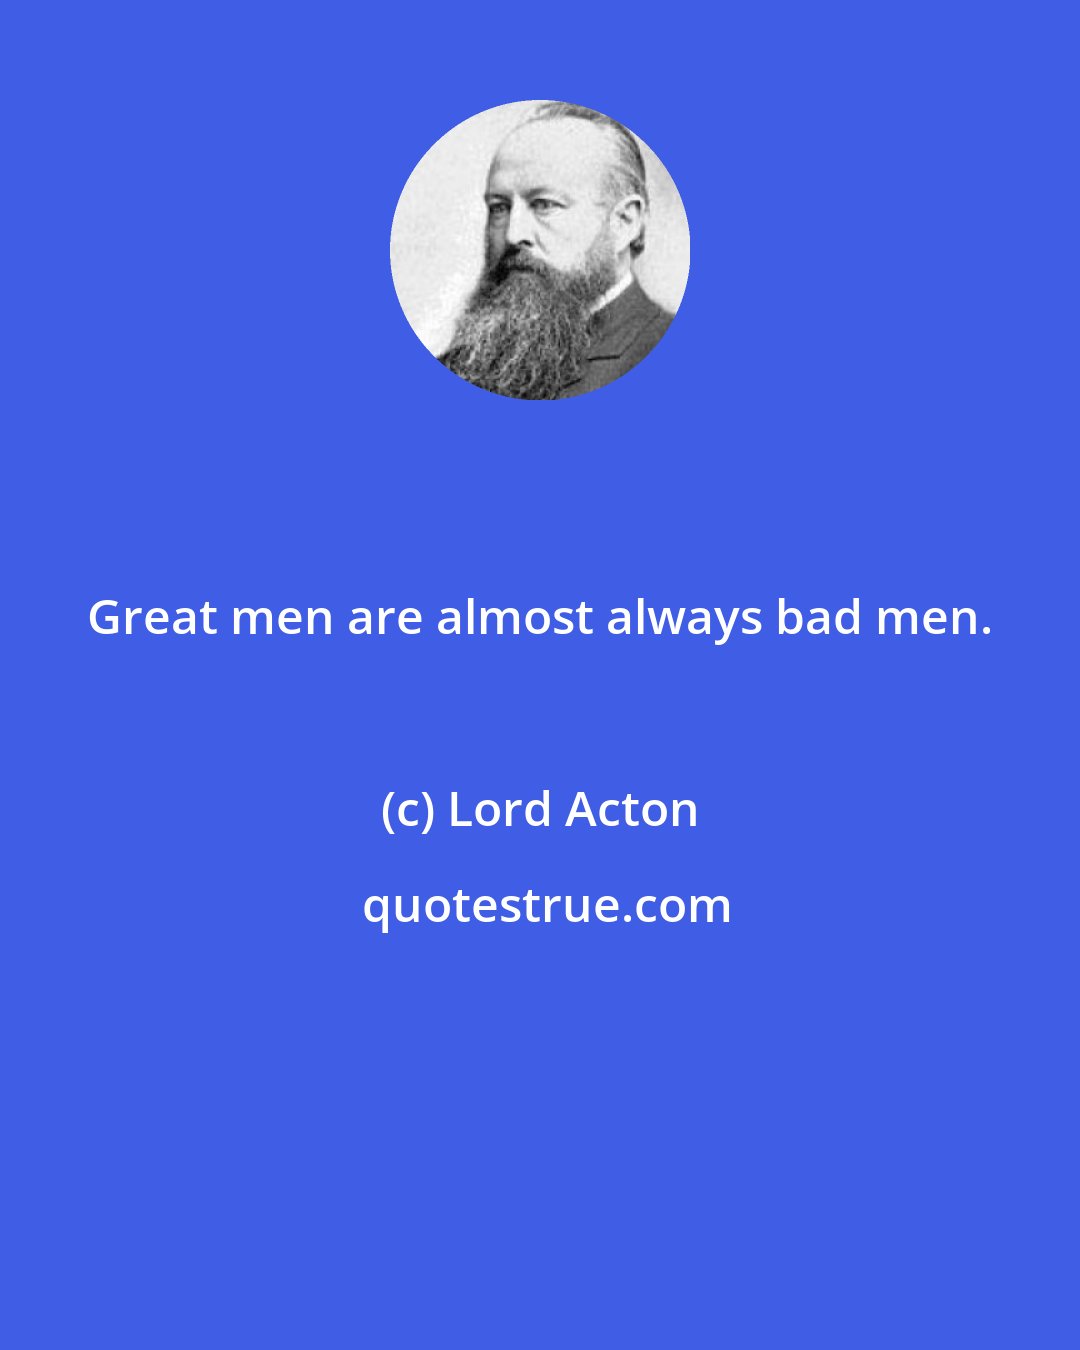 Lord Acton: Great men are almost always bad men.